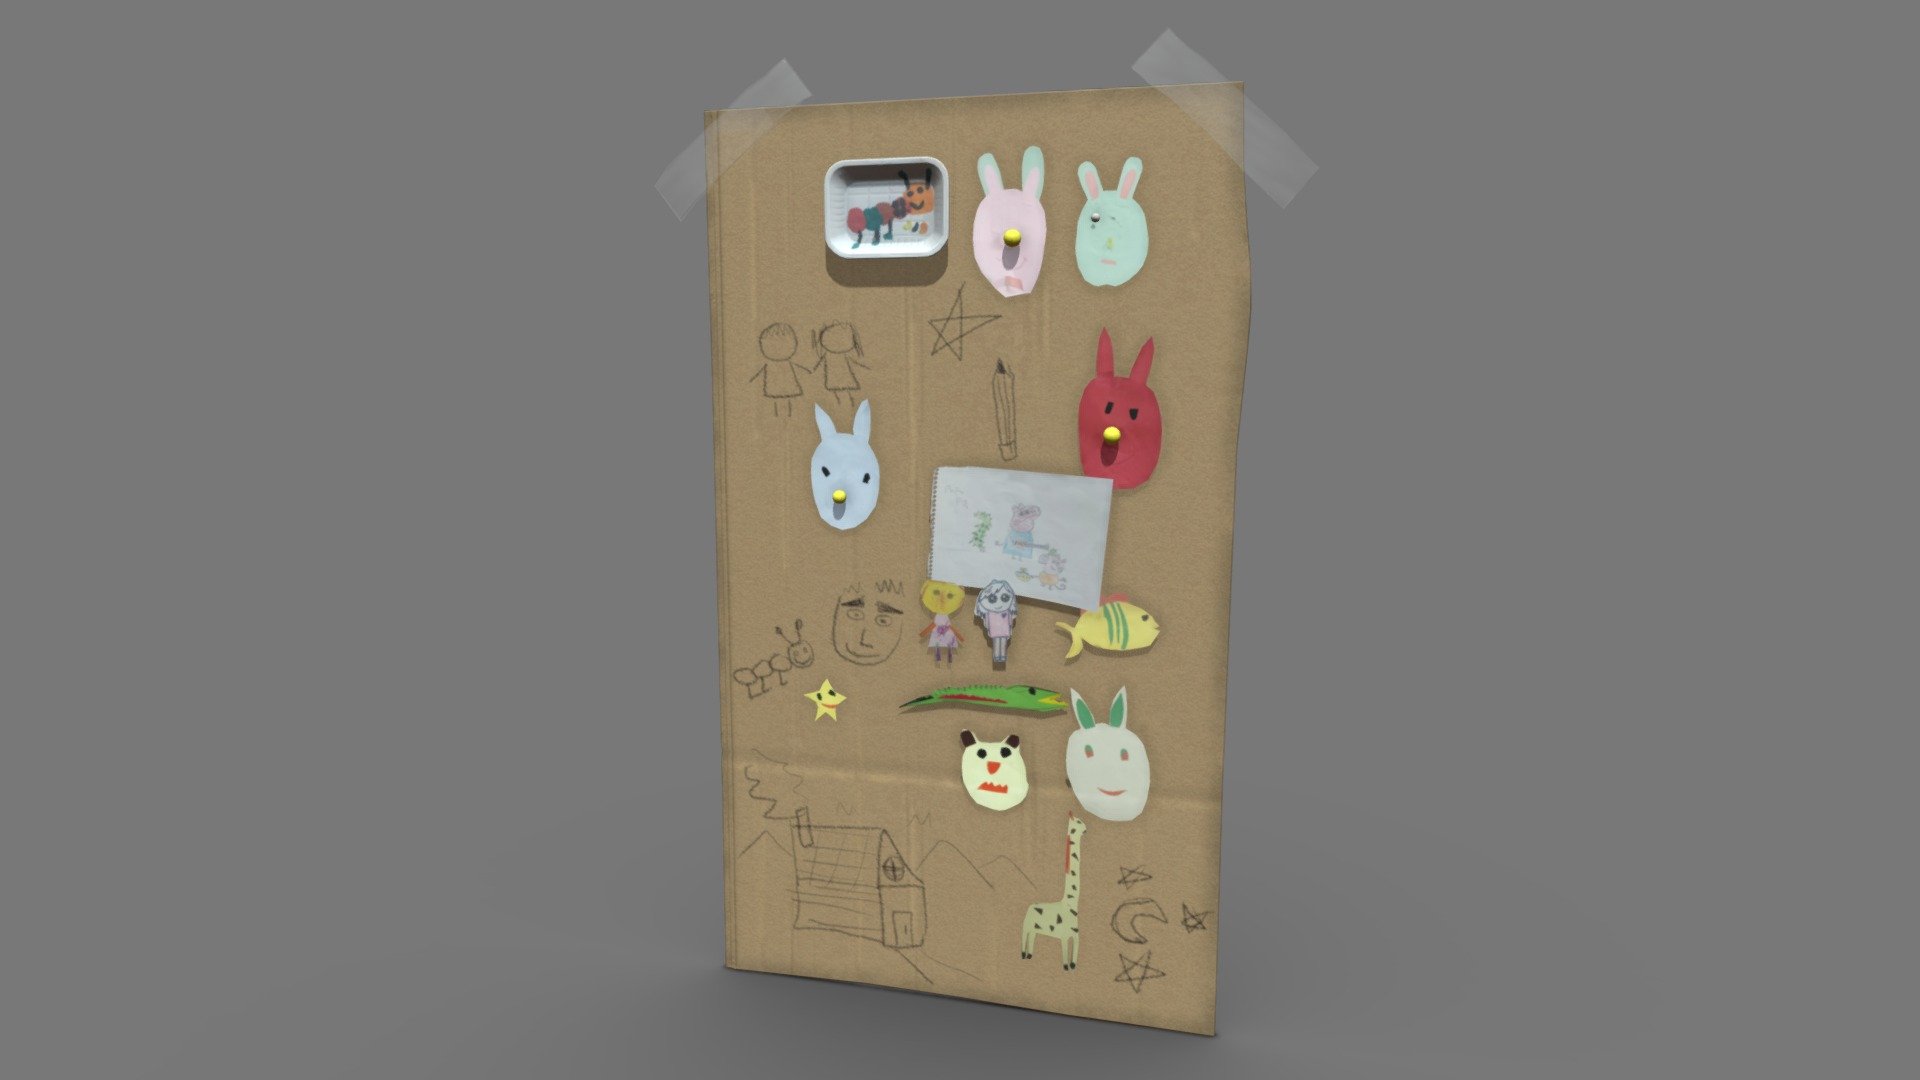 Cardboard kids Draw, low poly Optimize,
suitable for game ,AR ,VR.

to support :
https://www.patreon.com/kloworks

Thanks - Cardboard Kids Draw - Buy Royalty Free 3D model by KloWorks 3d model